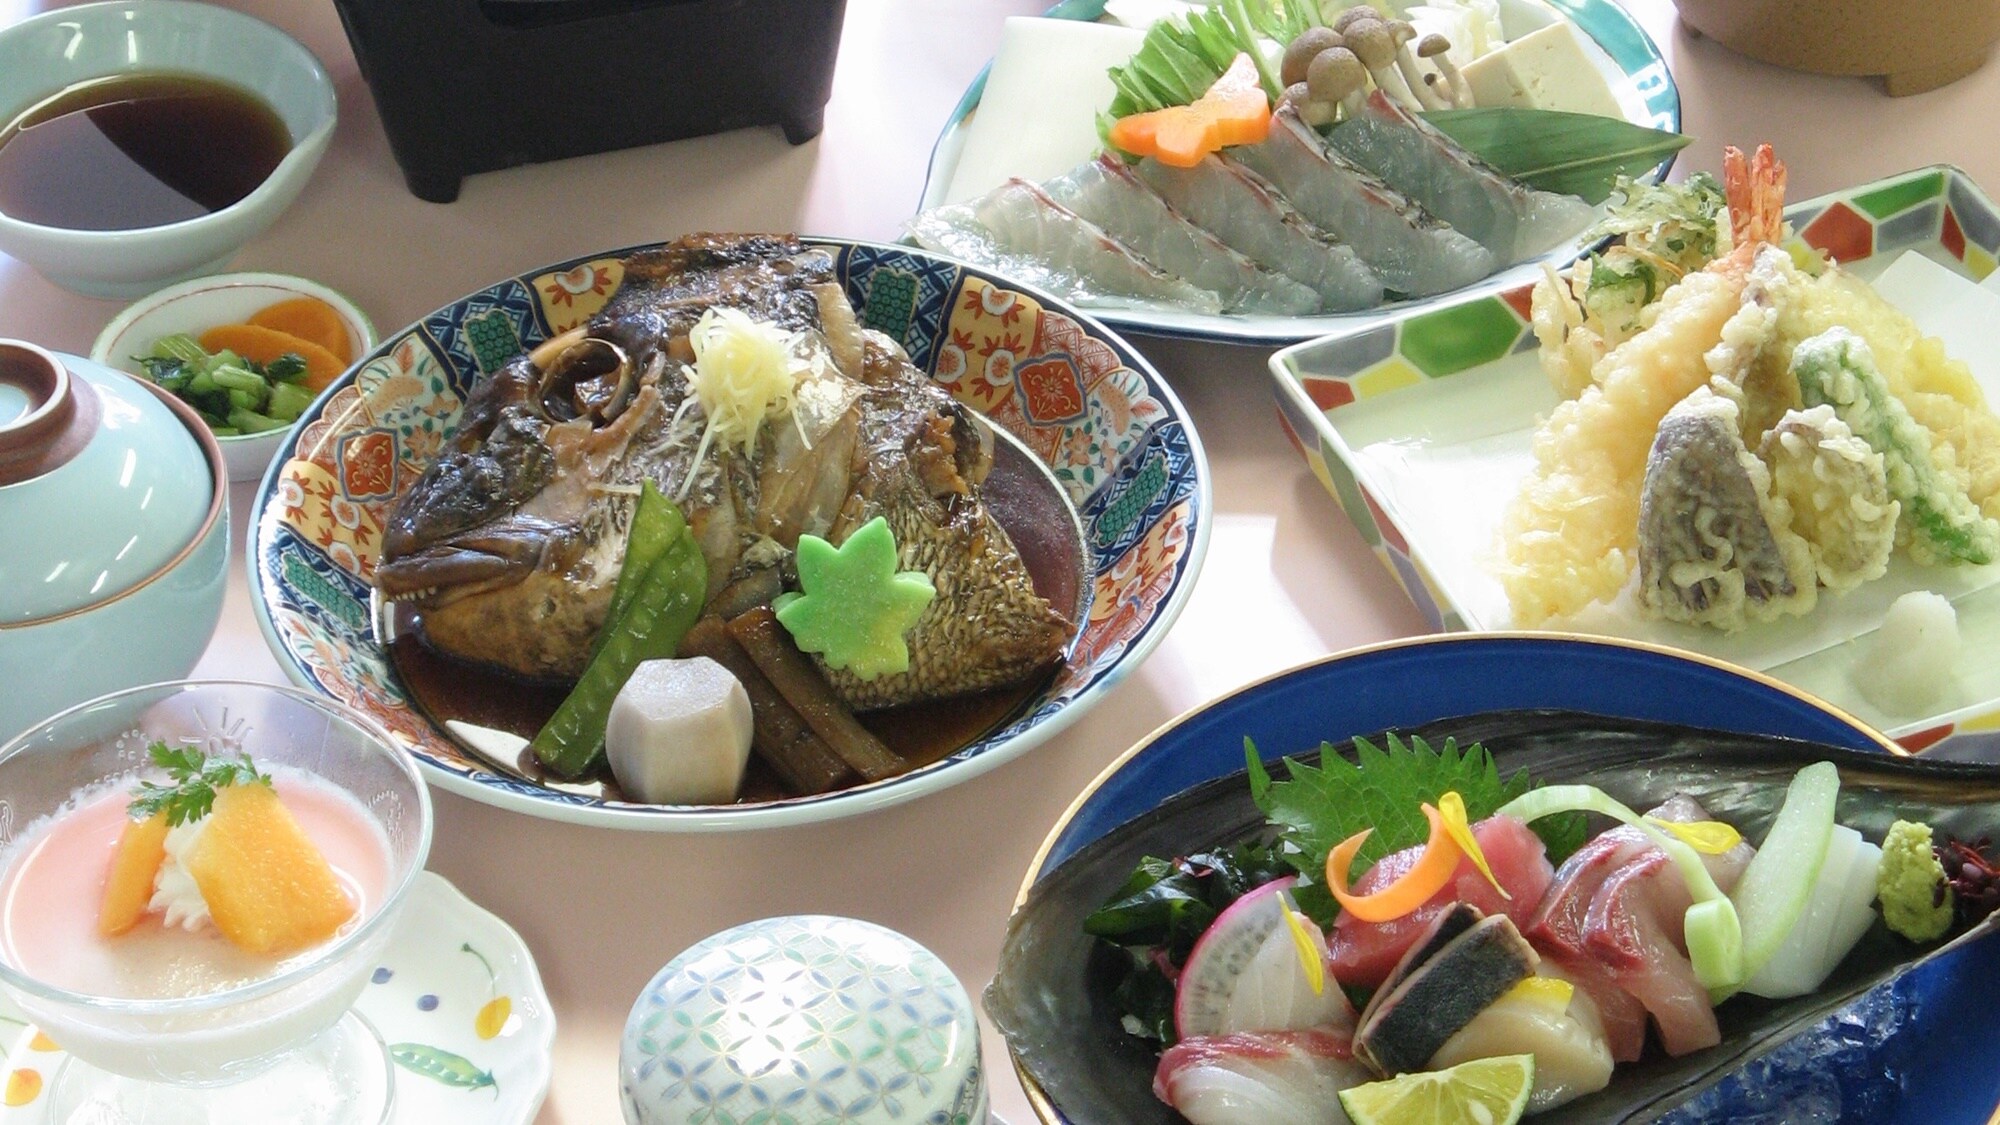 [Pine plan] and a "sea" course that uses plenty of seafood from Kaiyo Town, Tokushima